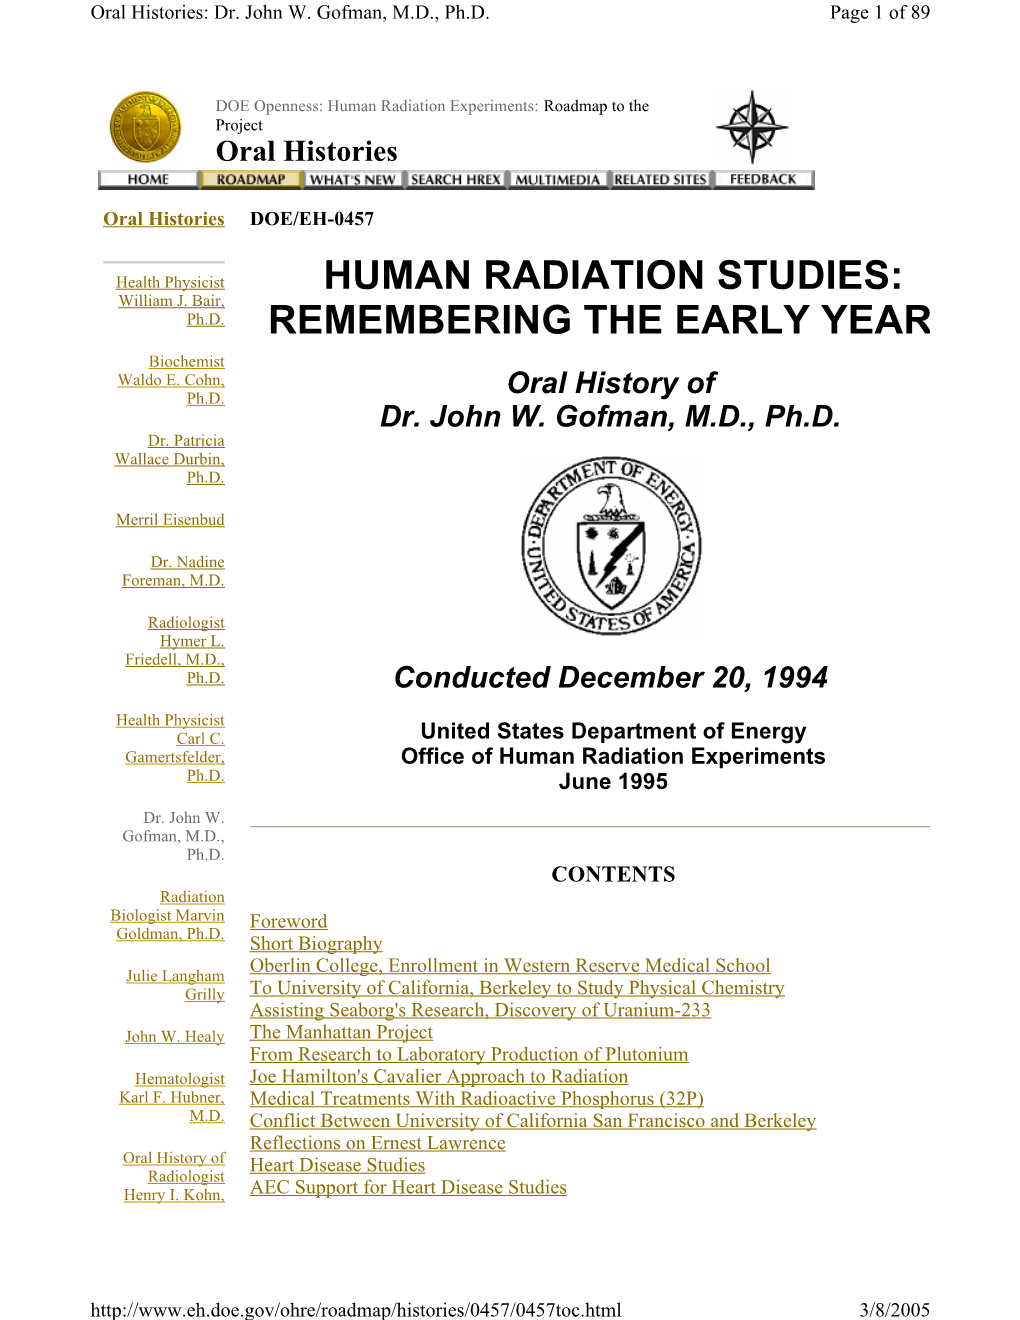 Human Radiation Studies: Remembering the Early Year